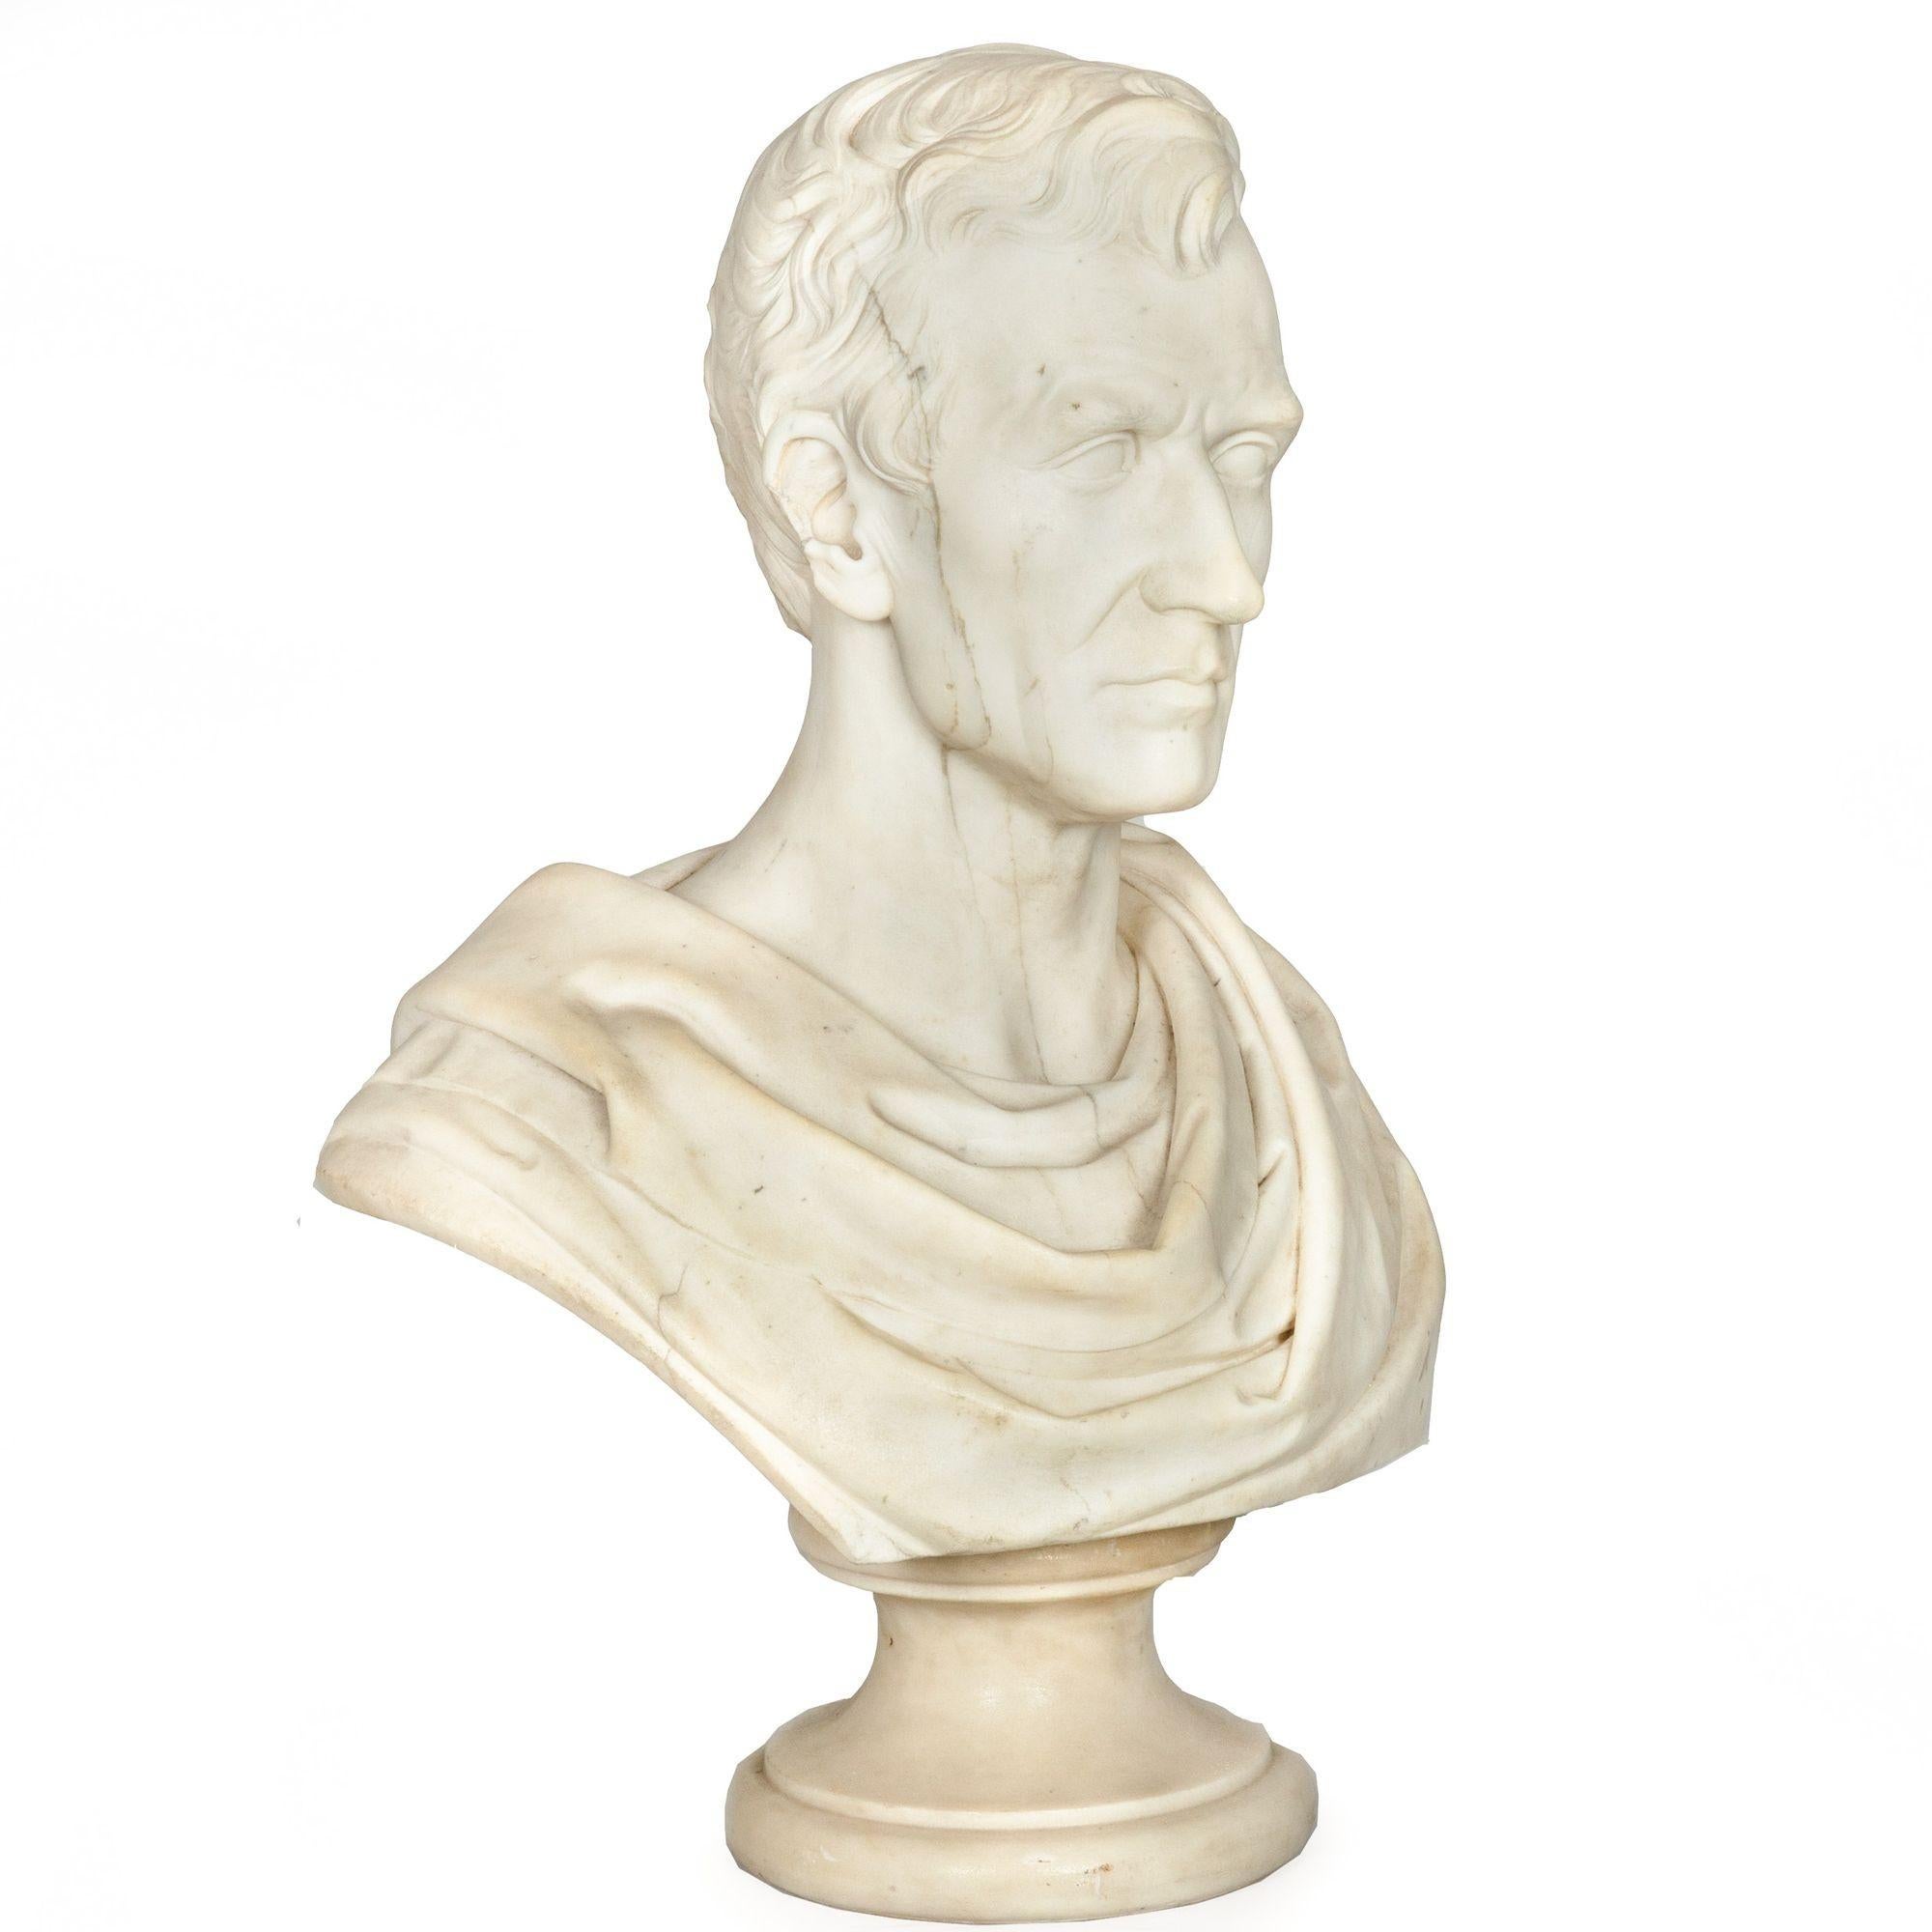 A CARVED MARBLE BUST OF A CLASSICAL STATESMAN

Carrara marble on separately turned socle  unsigned  Circa mid-to-late 19th century

Item # 307FDI13Q 

An incredibly powerful bust of a yet unidentified Classical Statesman executed with exacting